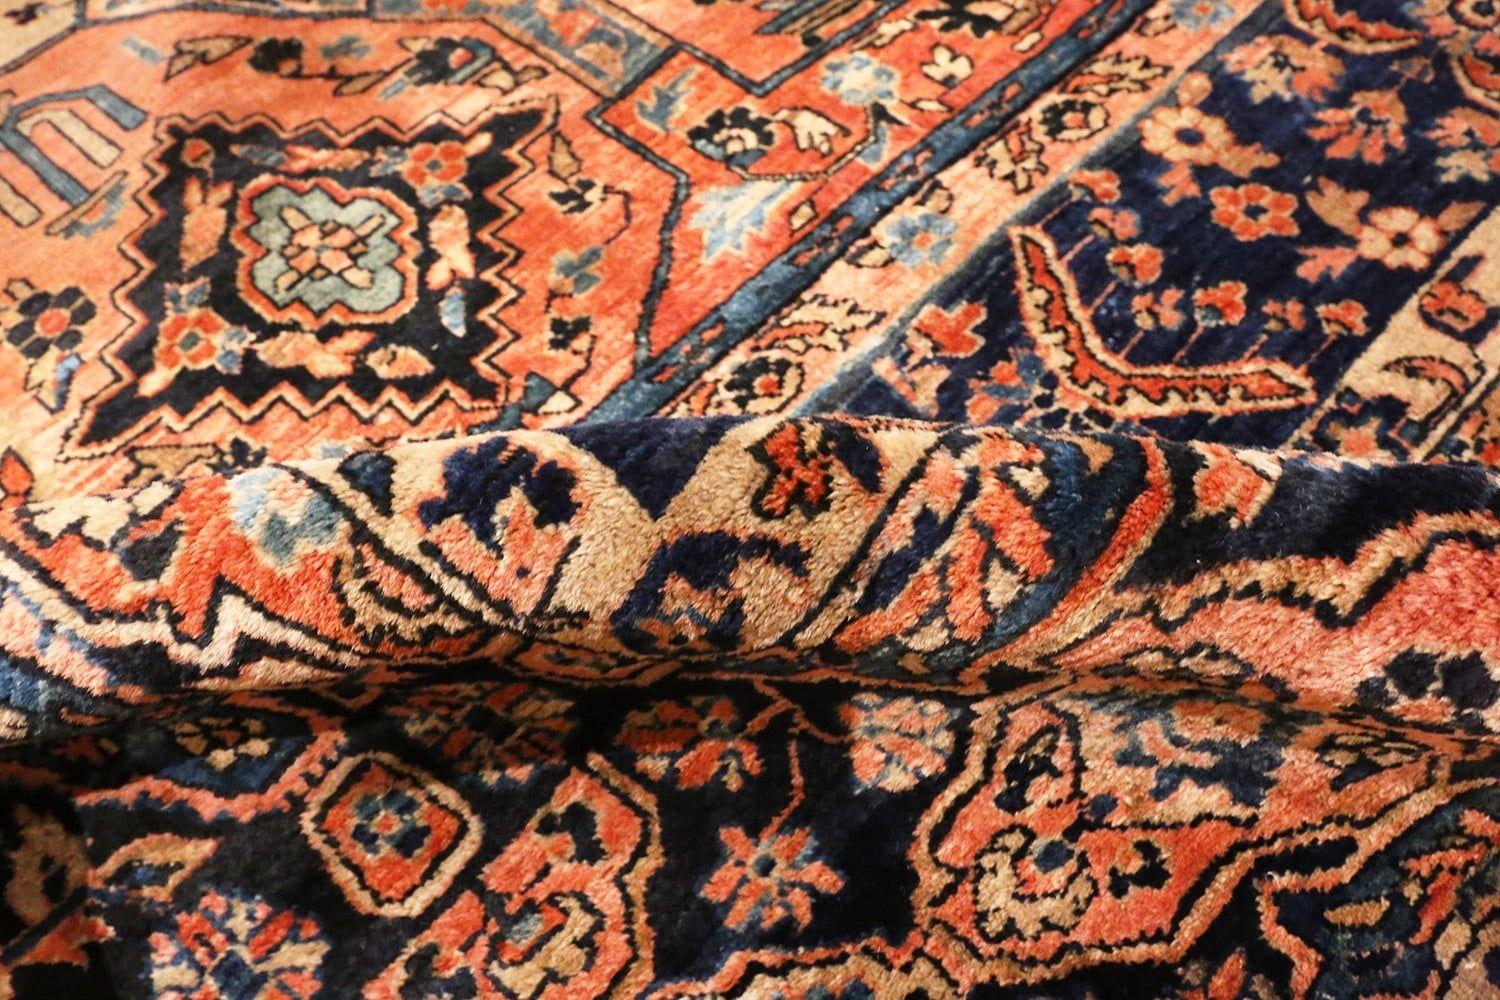 A beautiful Jewel tone colored room size antique Persian Sarouk rug, country of origin / rugs type: Antique Persian rugs, date: circa 1920.